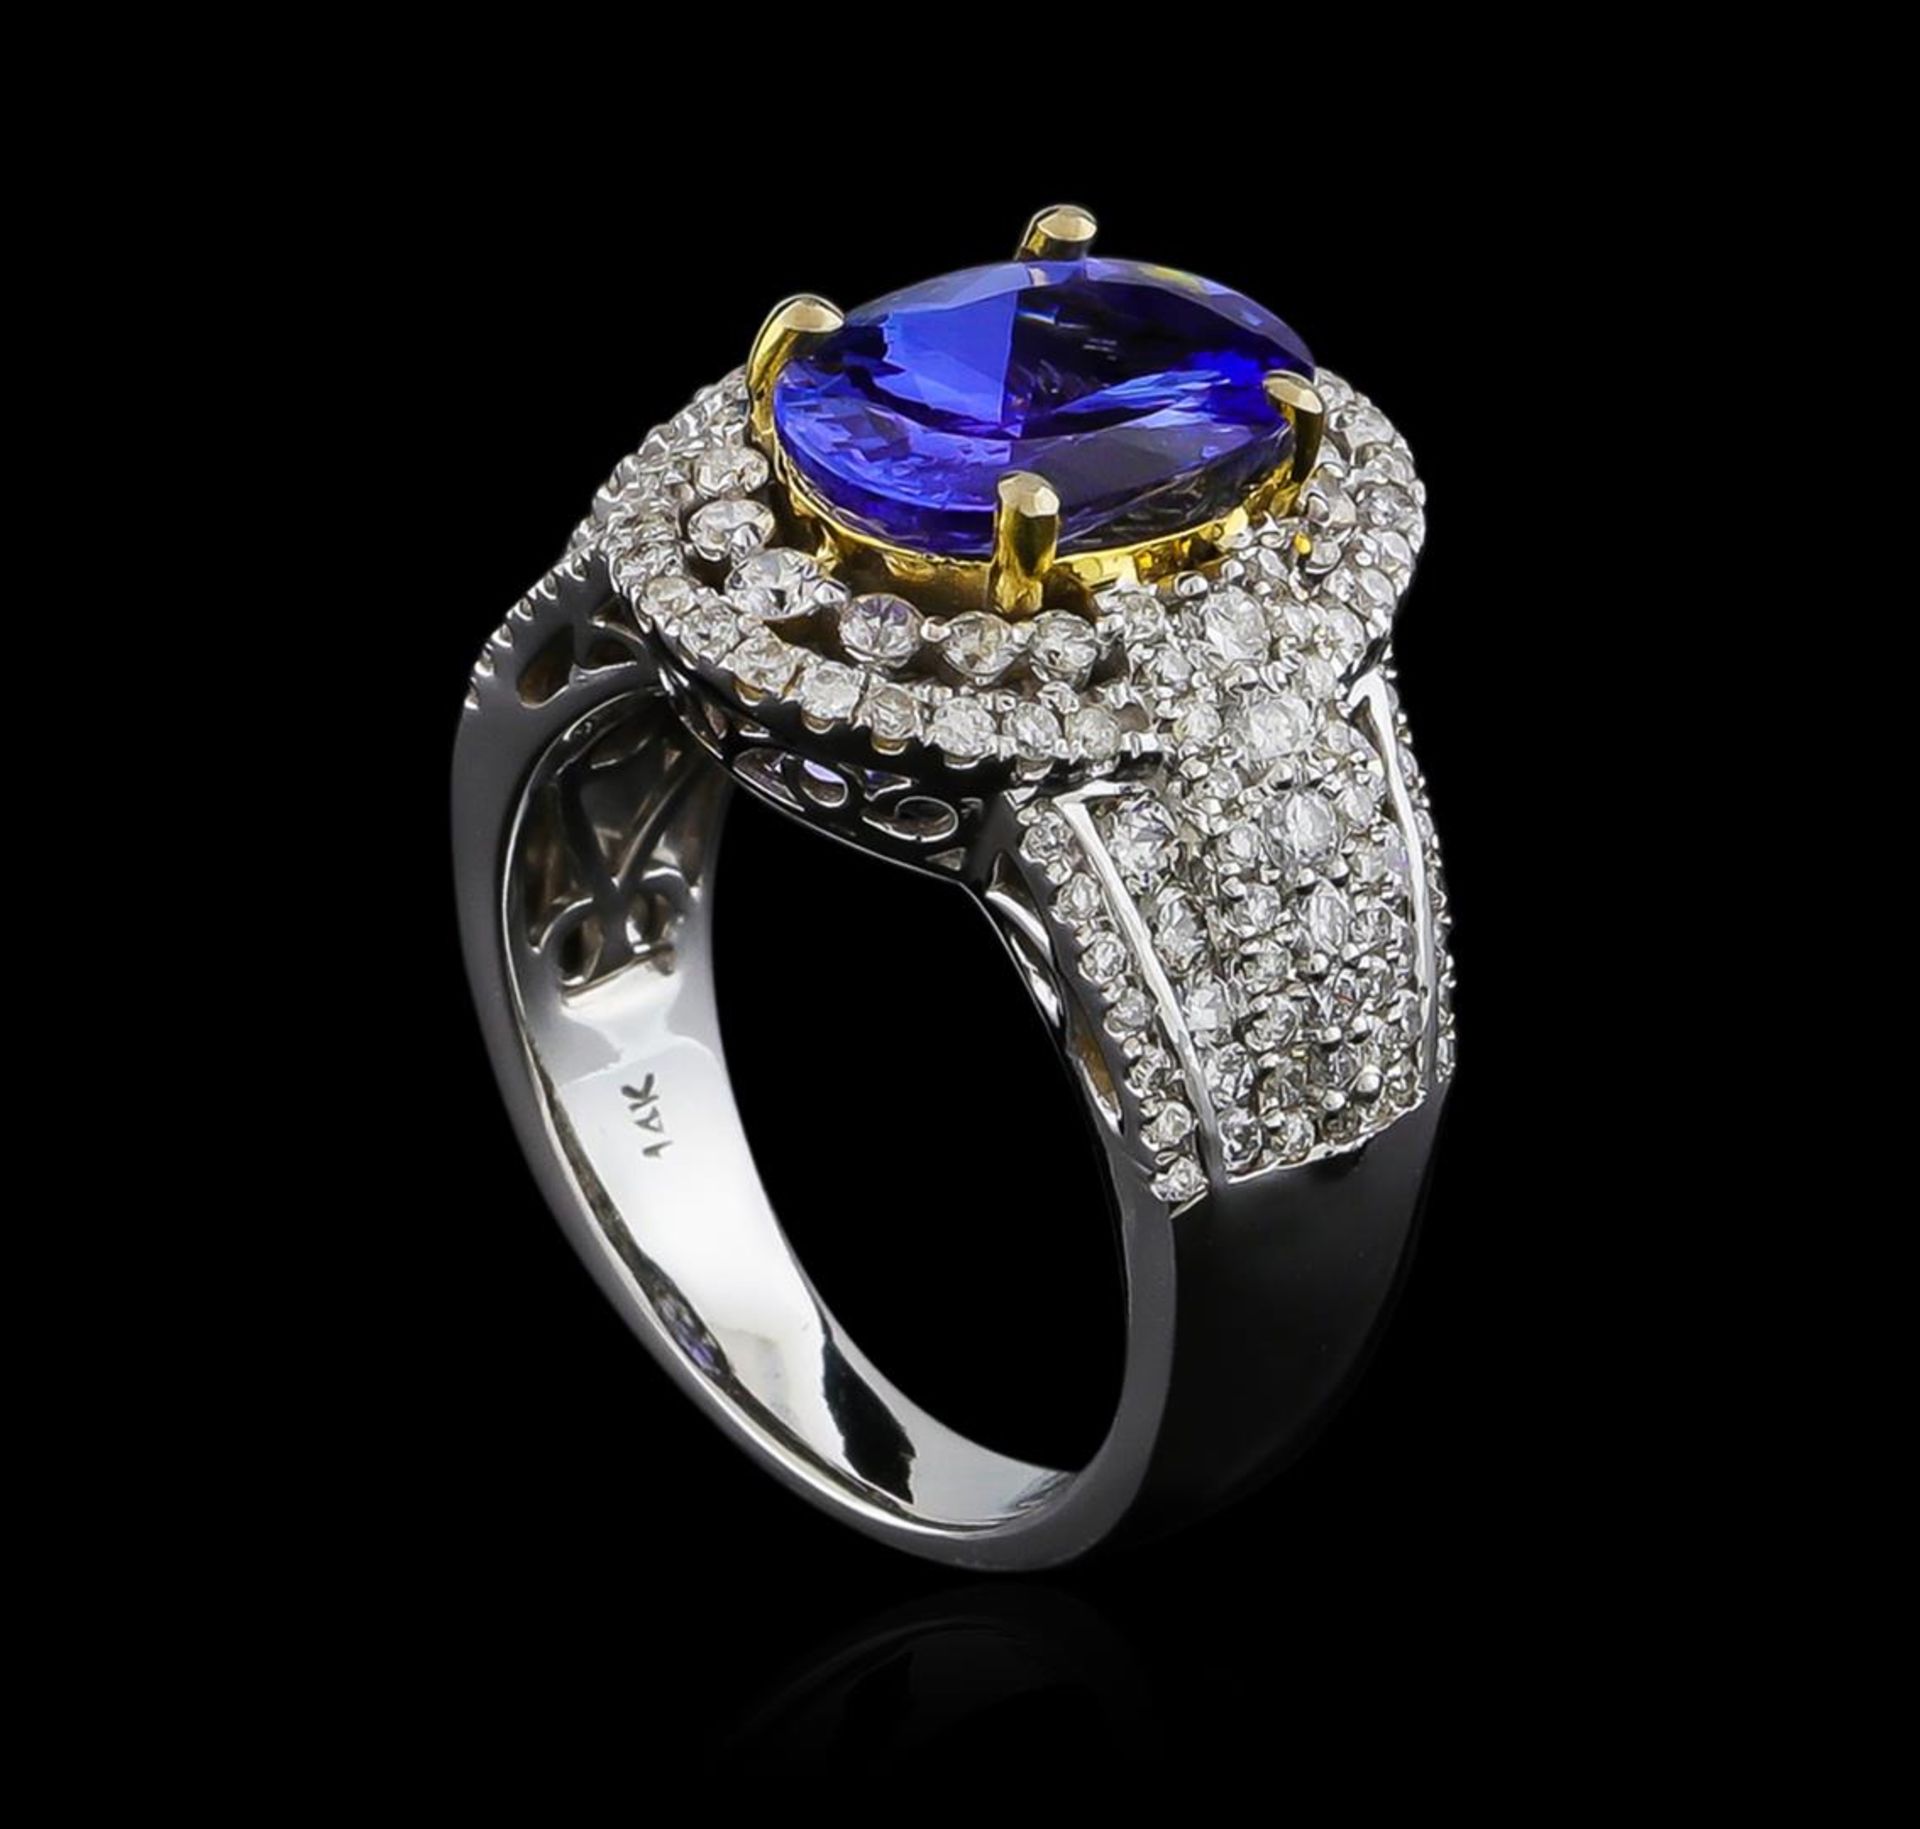 14KT Two-Tone Gold 4.12 ctw Tanzanite and Diamond Ring - Image 4 of 5